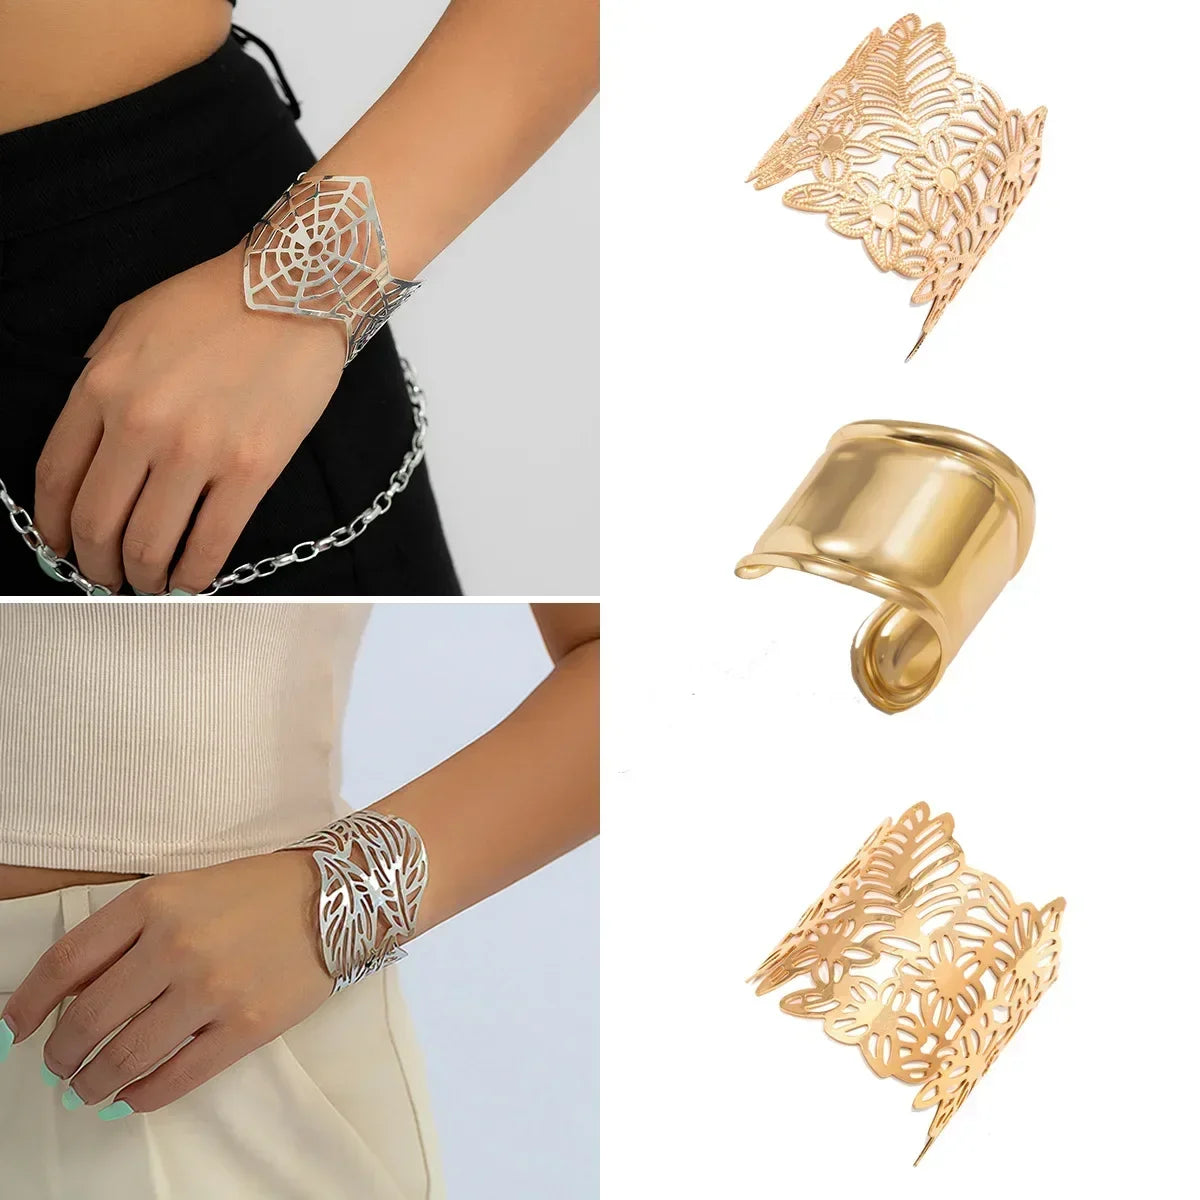 Elegant French-style Open Smooth Bracelet with a Delicate Vintage Hollow Out Leaf Charm, designed for Women's Jewelry.